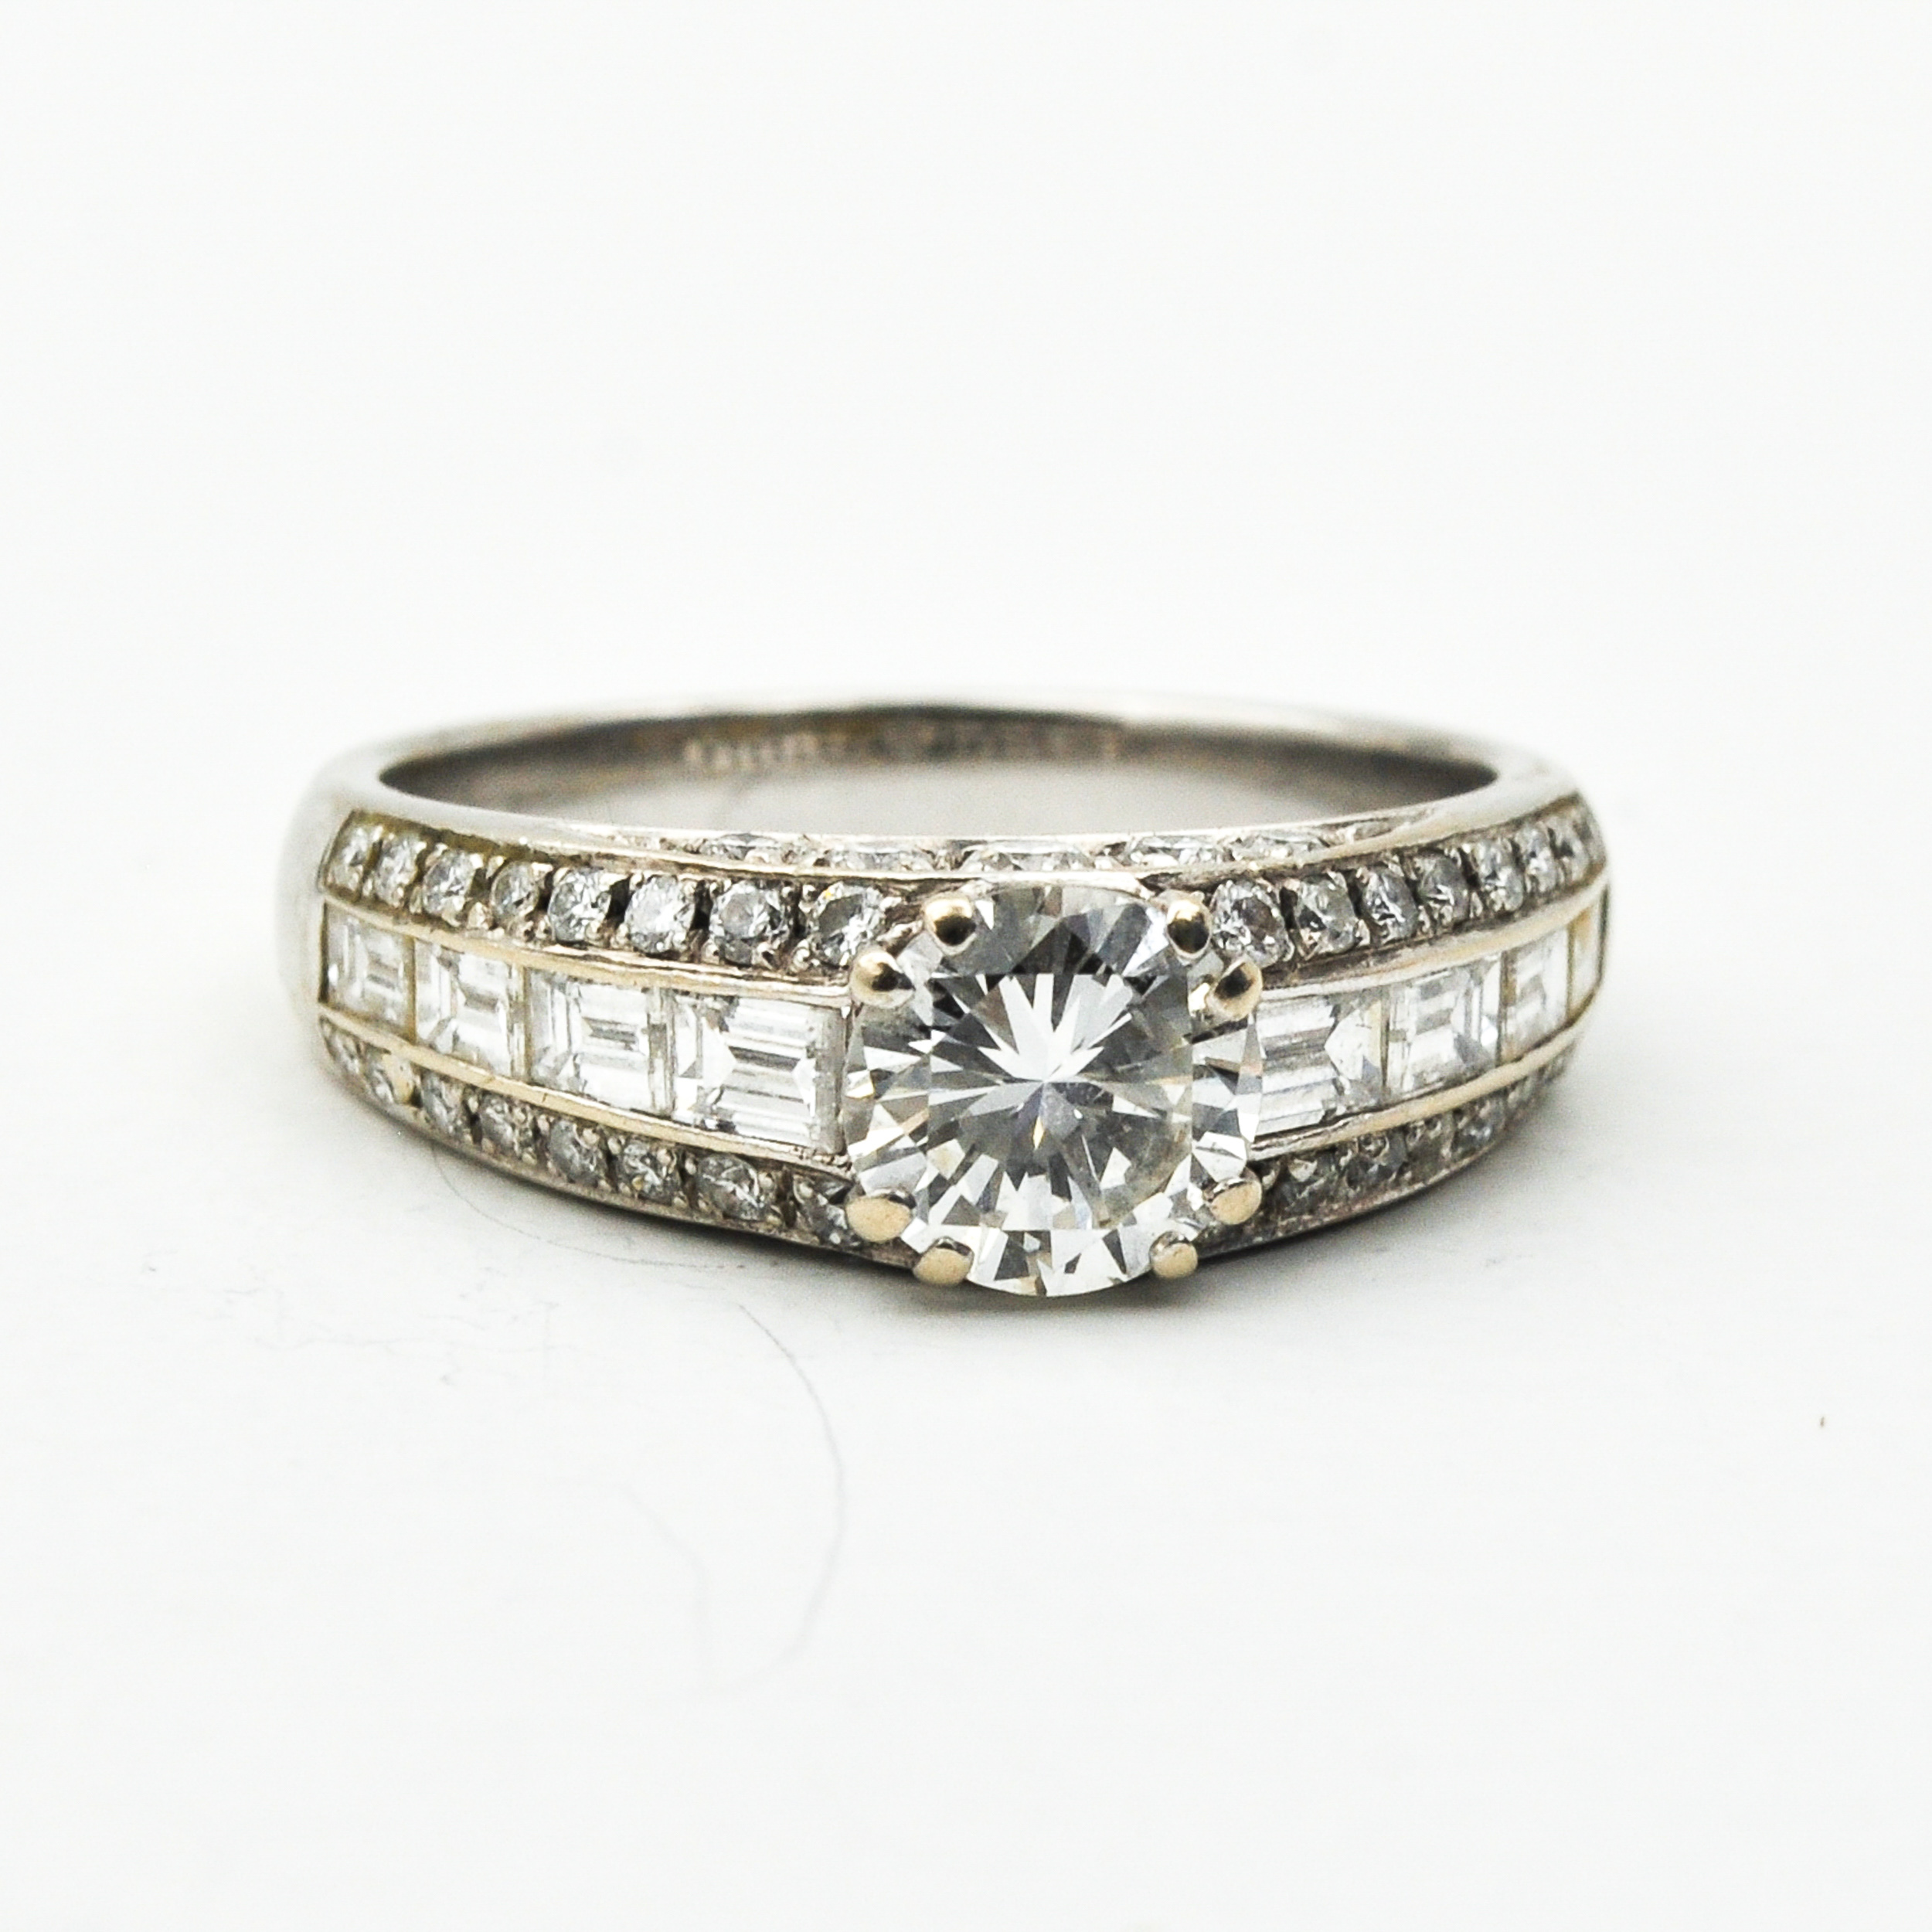 A Ladies Picchiotti 18KG and Diamond Ring